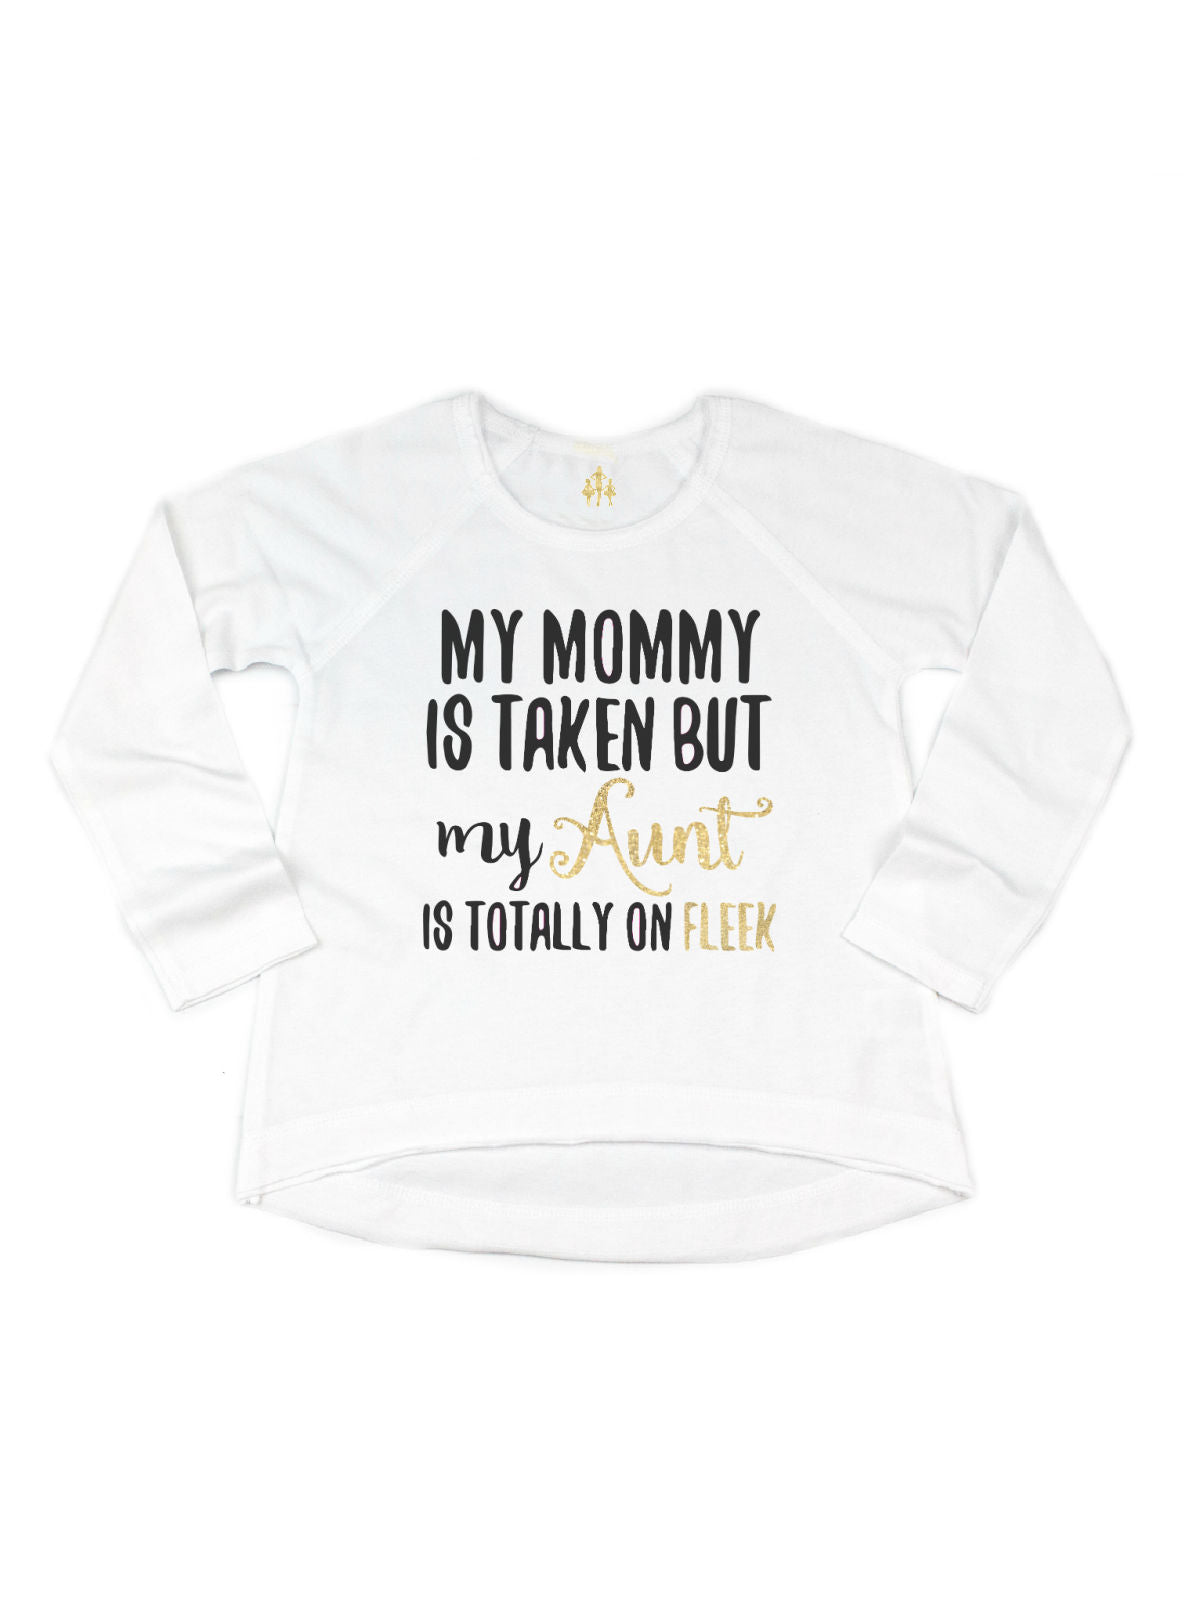 My Mommy Is Taken But My Aunt Is Totally On Fleek Girls Long Sleeve Shirt